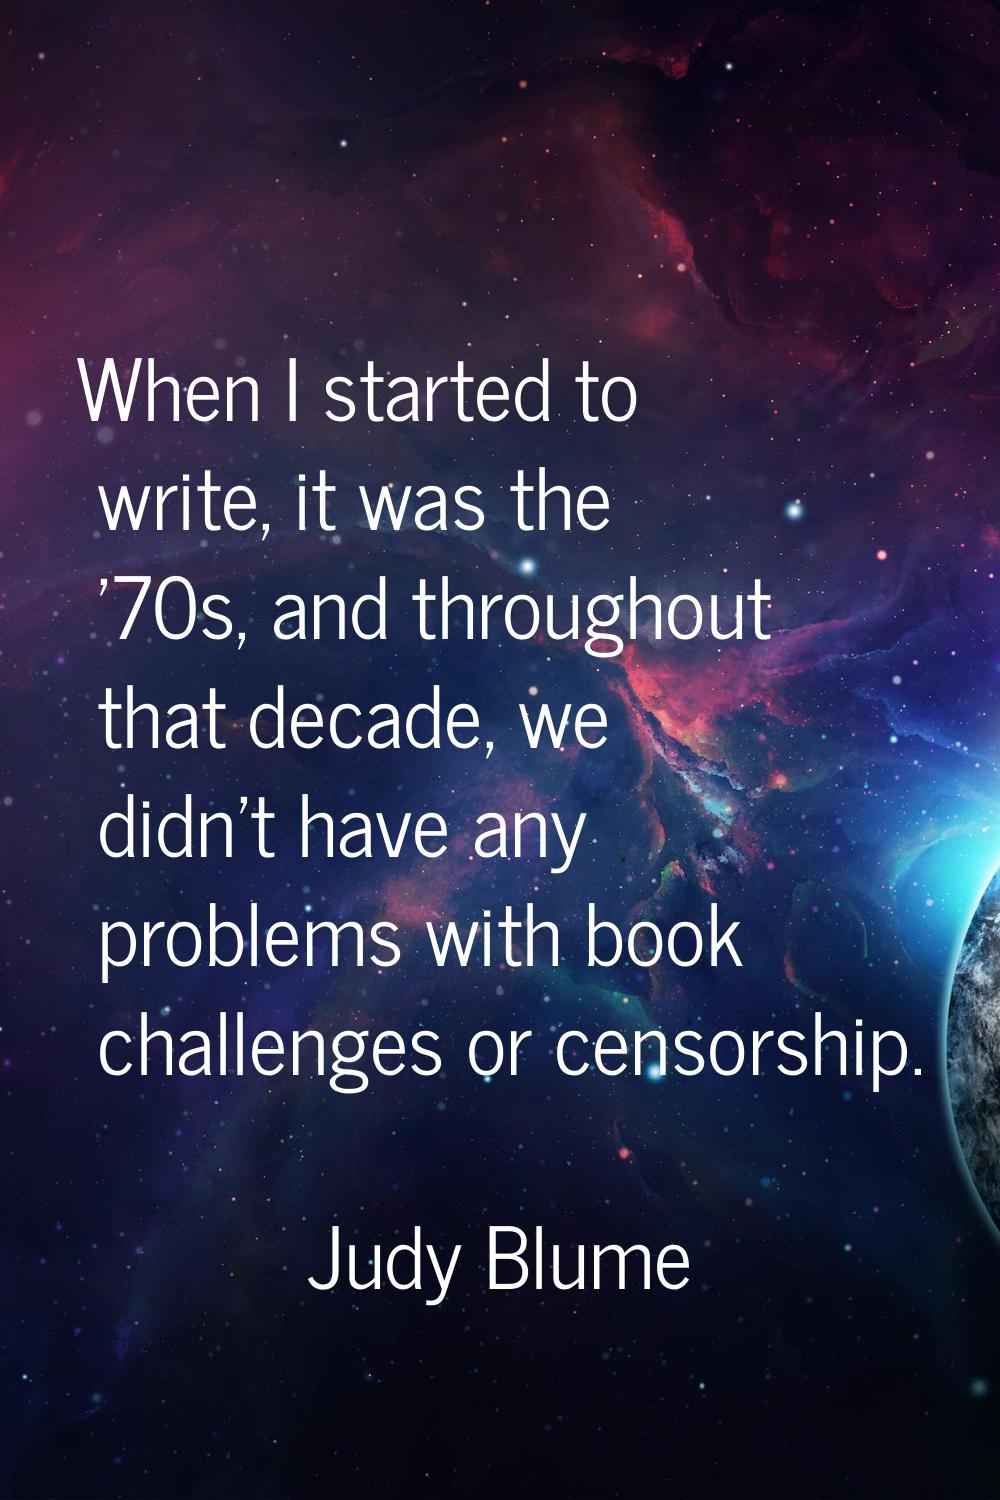 When I started to write, it was the '70s, and throughout that decade, we didn't have any problems w